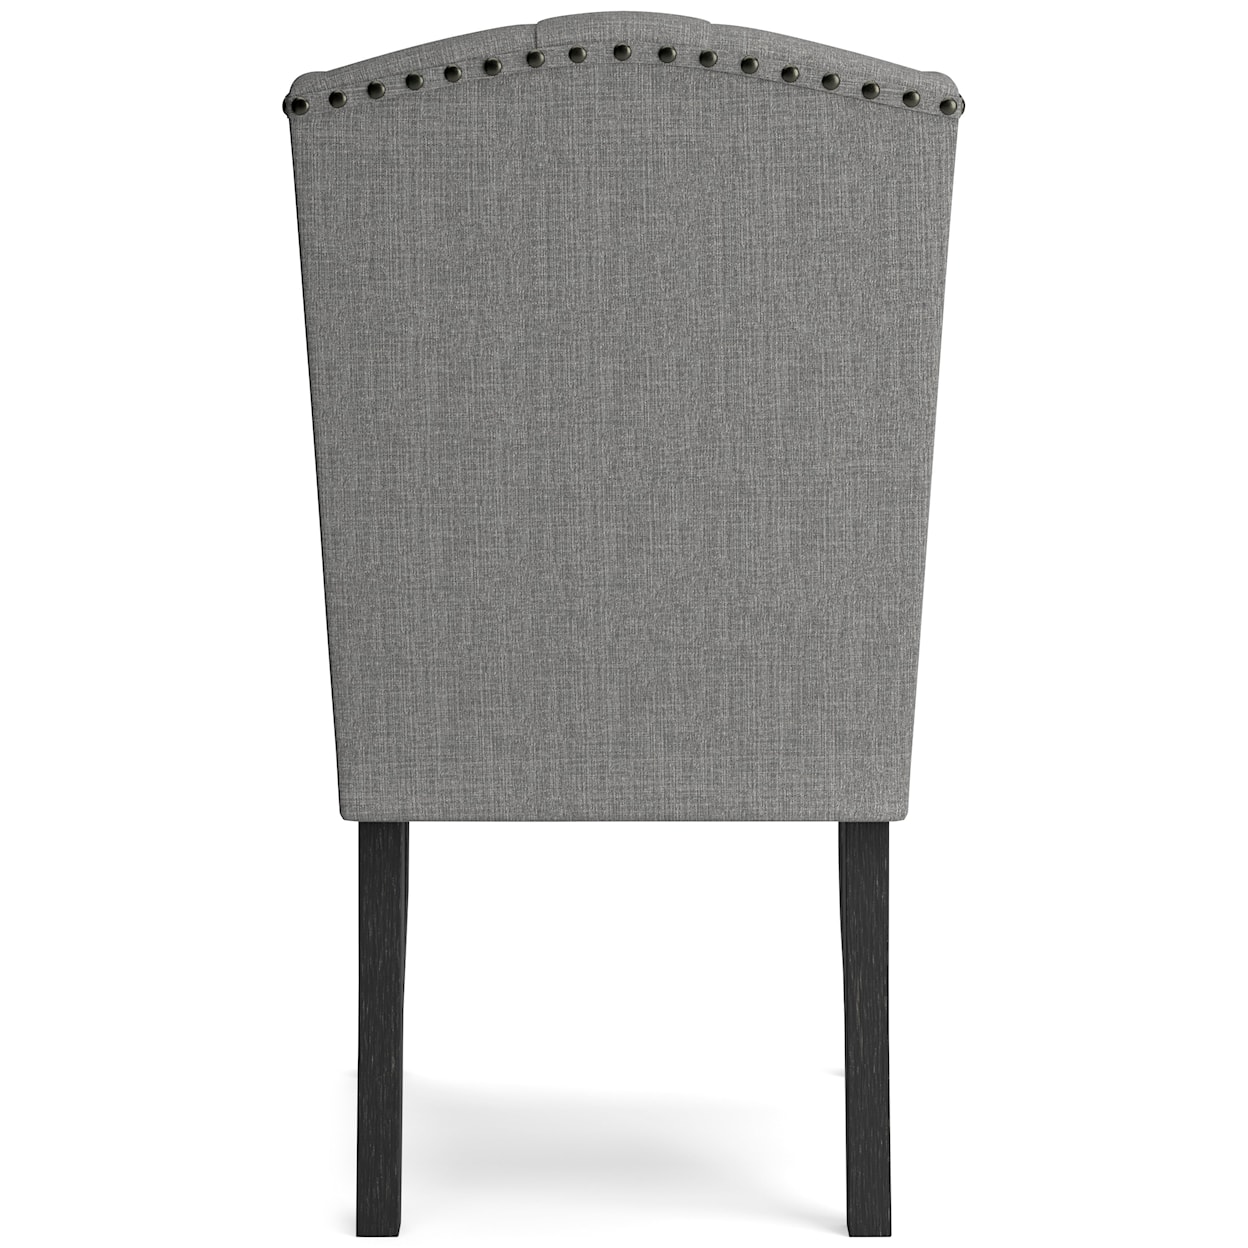 Ashley Signature Design Jeanette Dining Chair